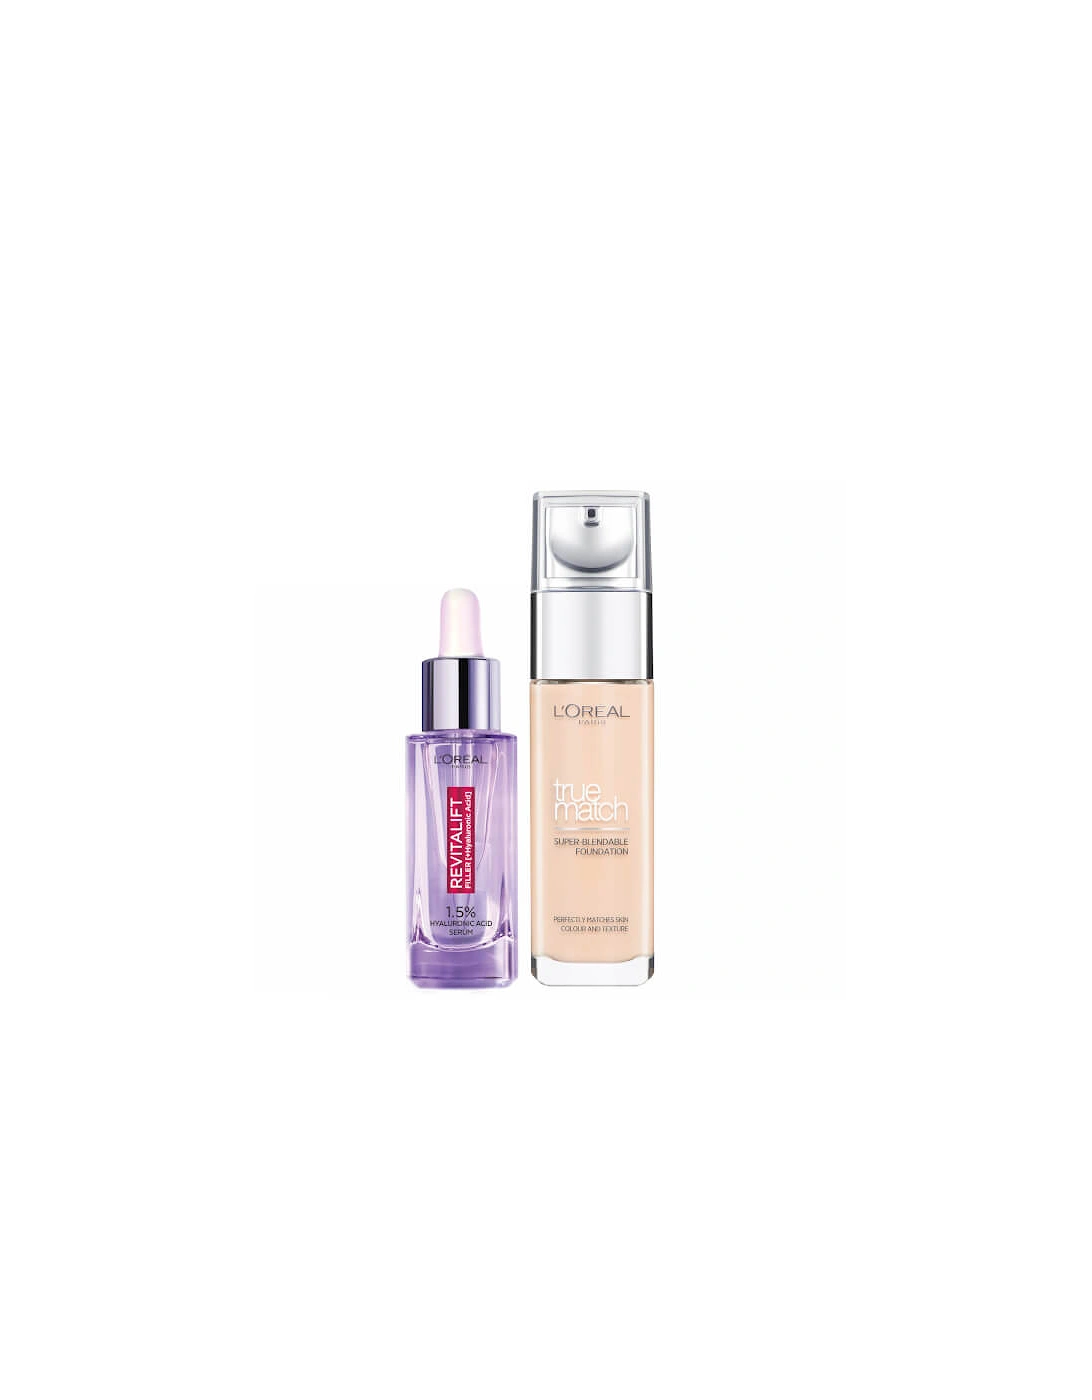 L’Oreal Paris Hyaluronic Acid Filler Serum and True Match Hyaluronic Acid Foundation Duo - 3N Creamy Beige, 2 of 1